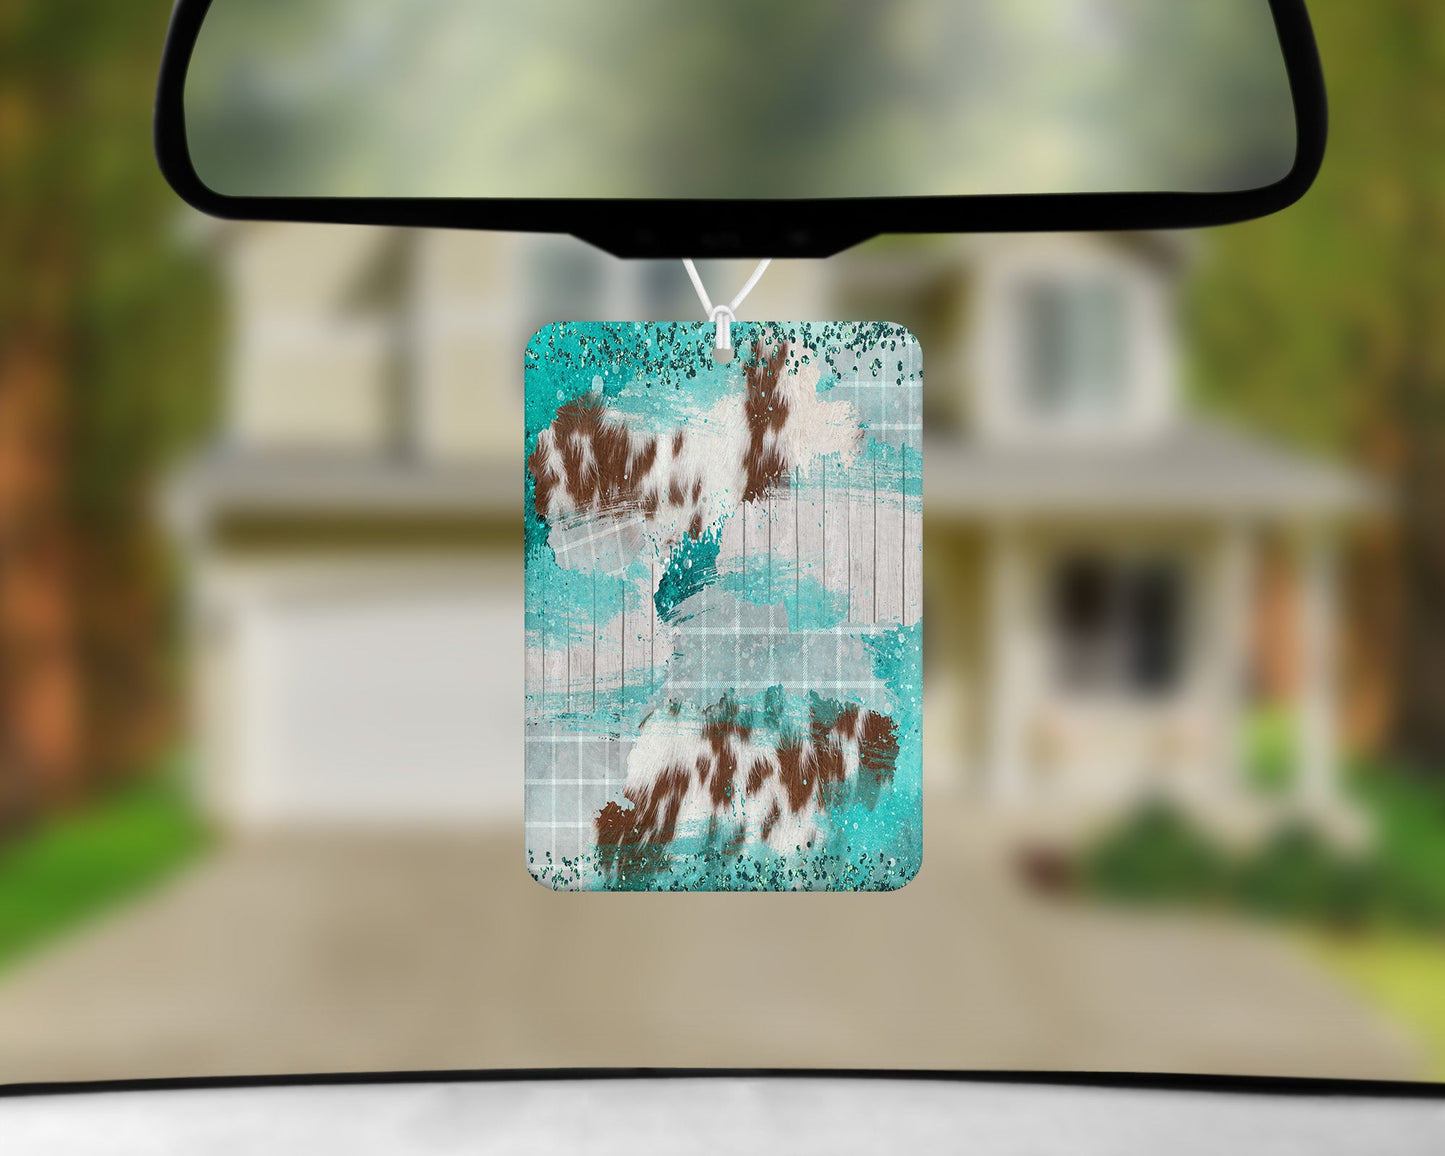 Cowhide Patchwork|Freshie|Includes Scent Bottle - Vehicle Air Freshener